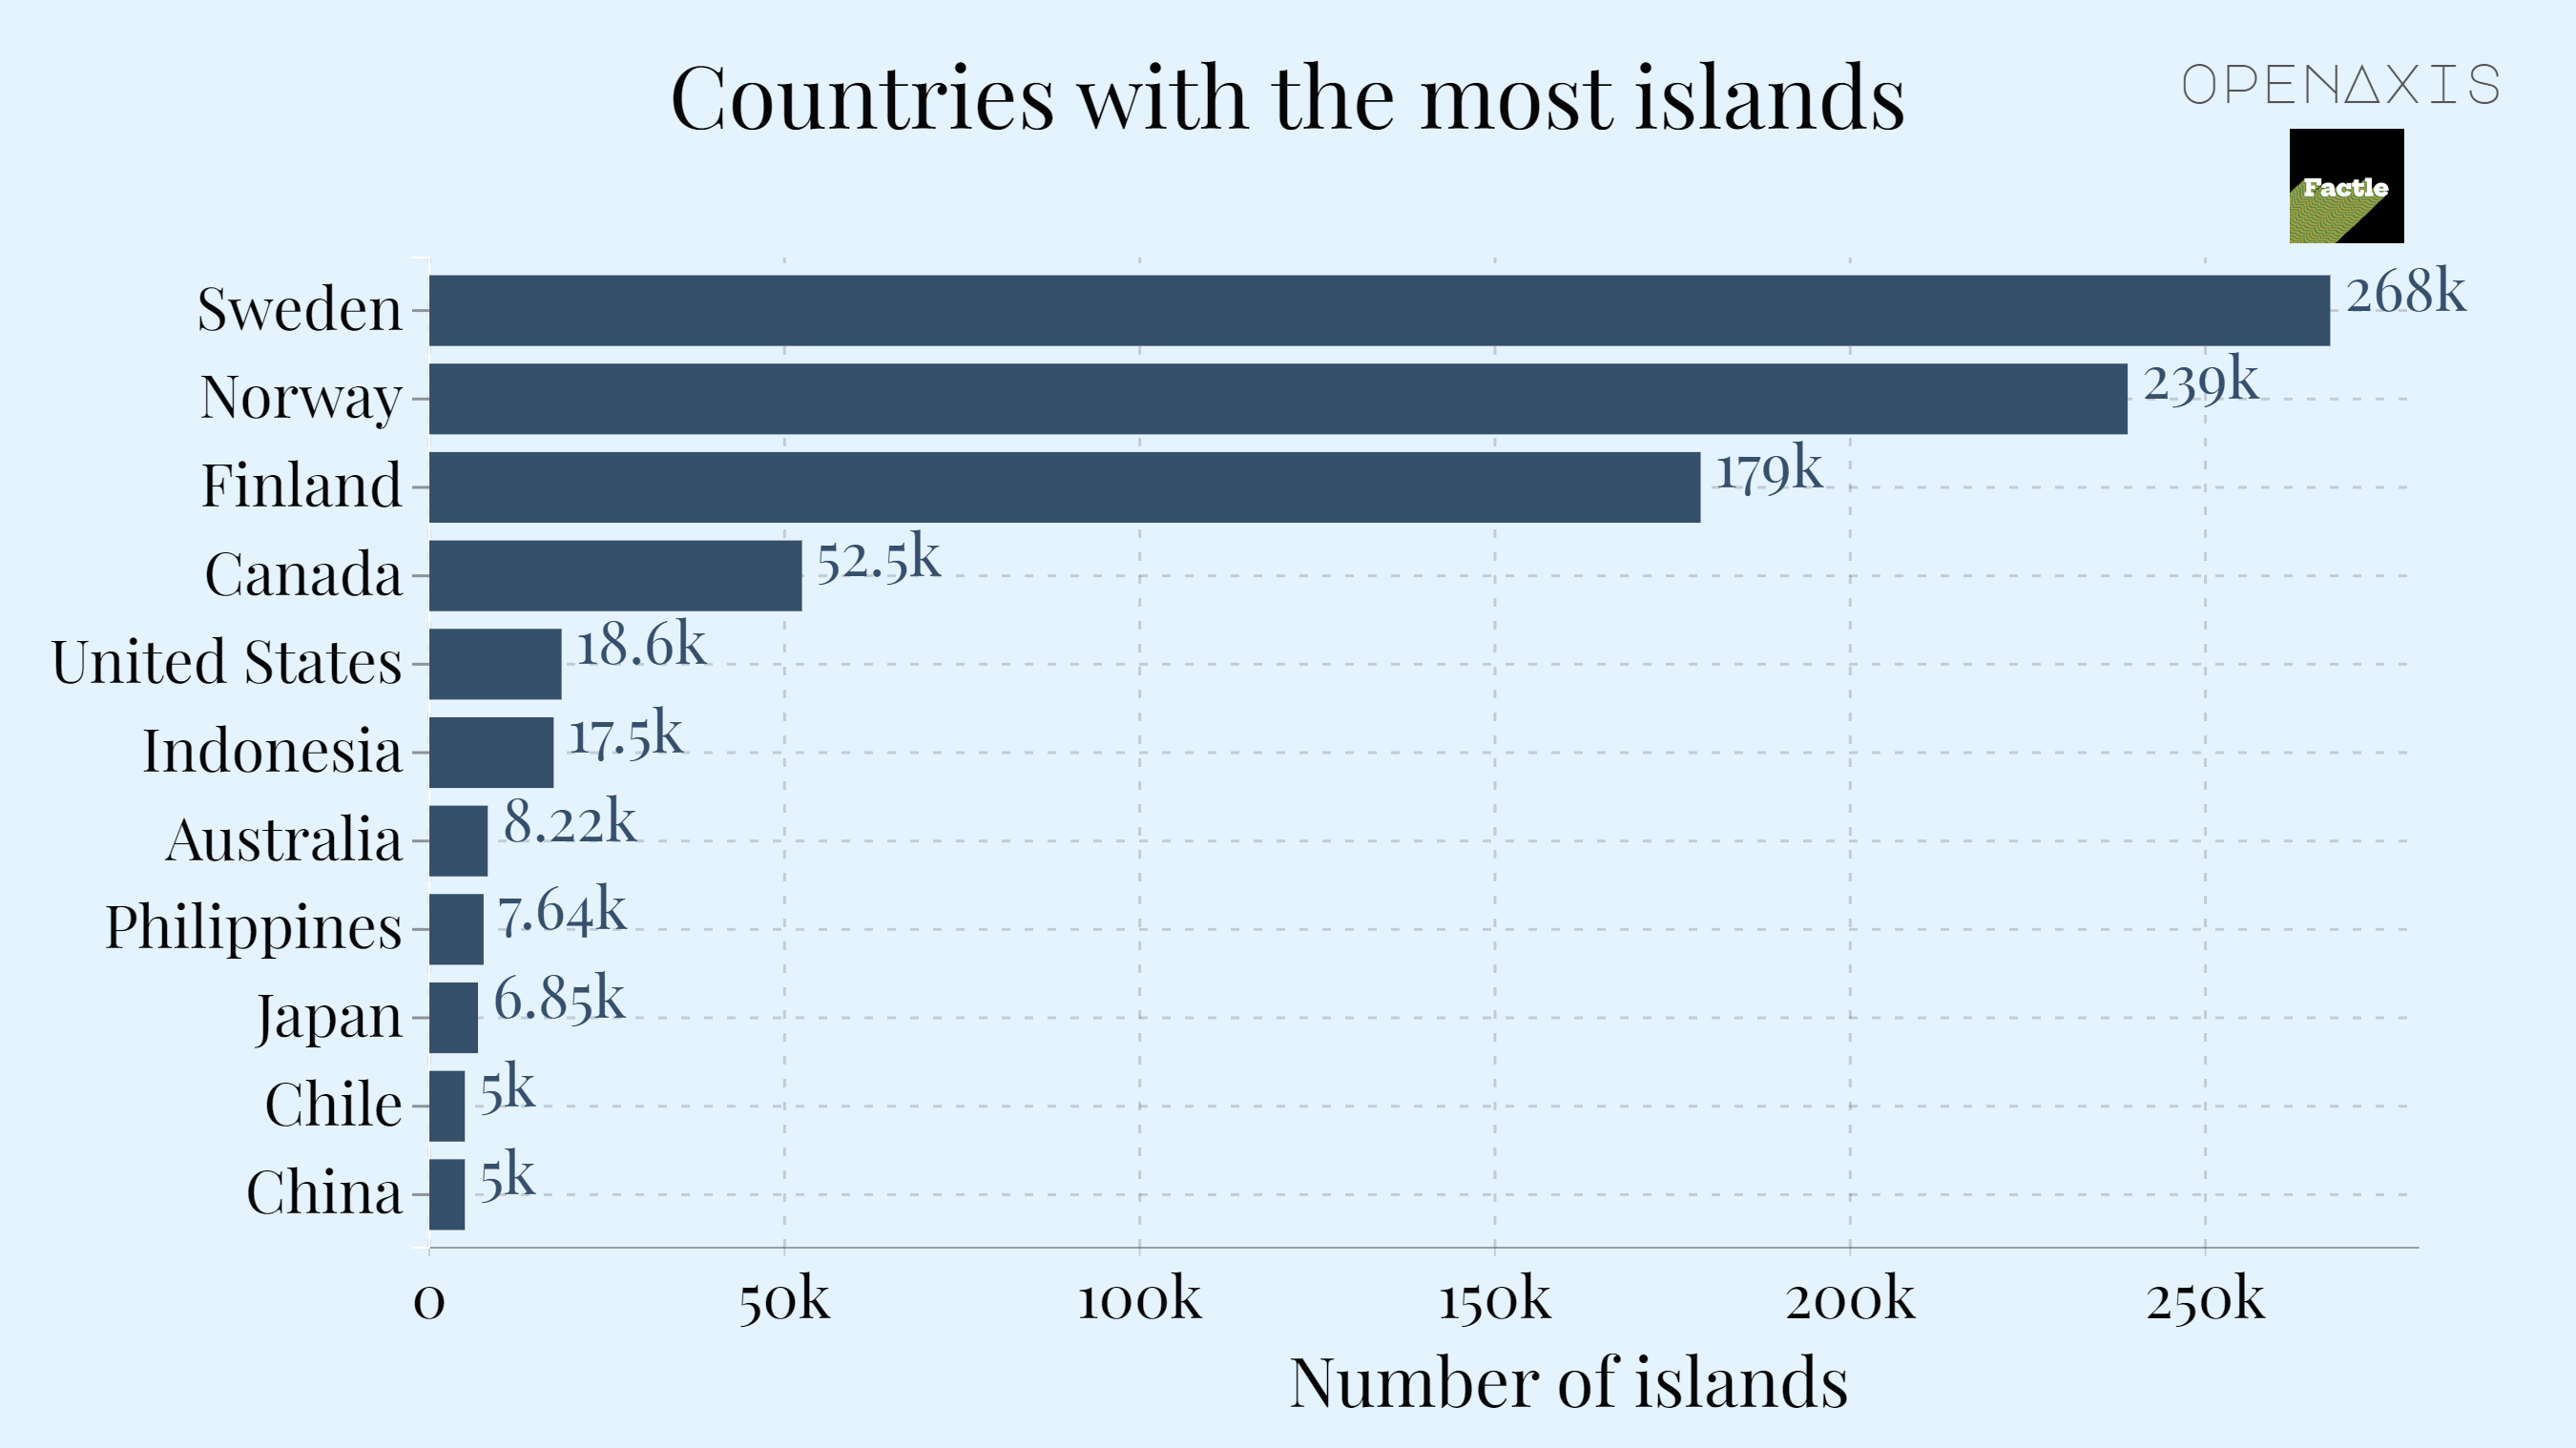 "Countries with the most islands"